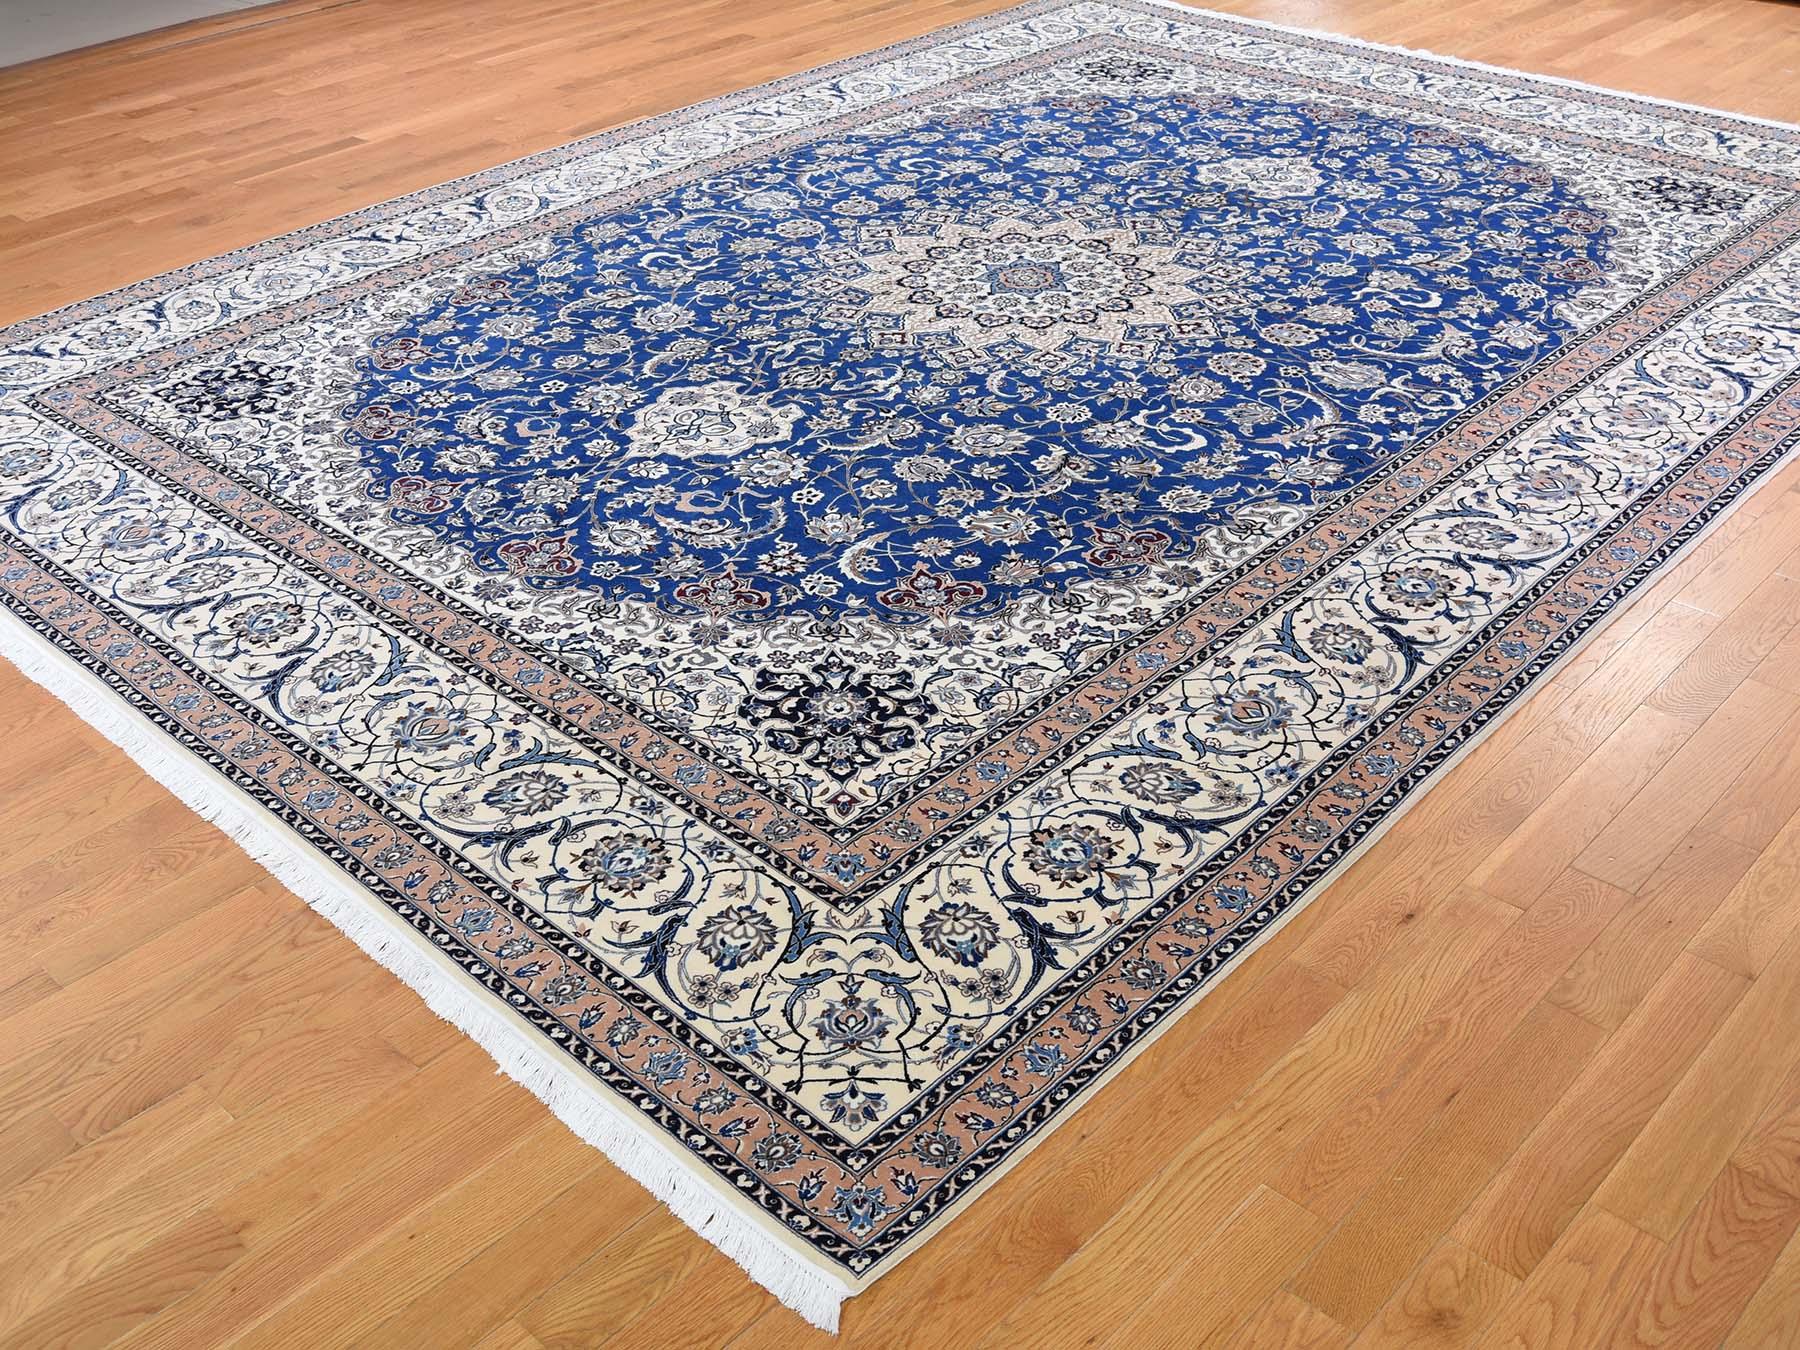 Hand-Knotted Wool and Silk Blue Persian Nain 400 KPSI Signed Habibian Hand Knotted Oriental